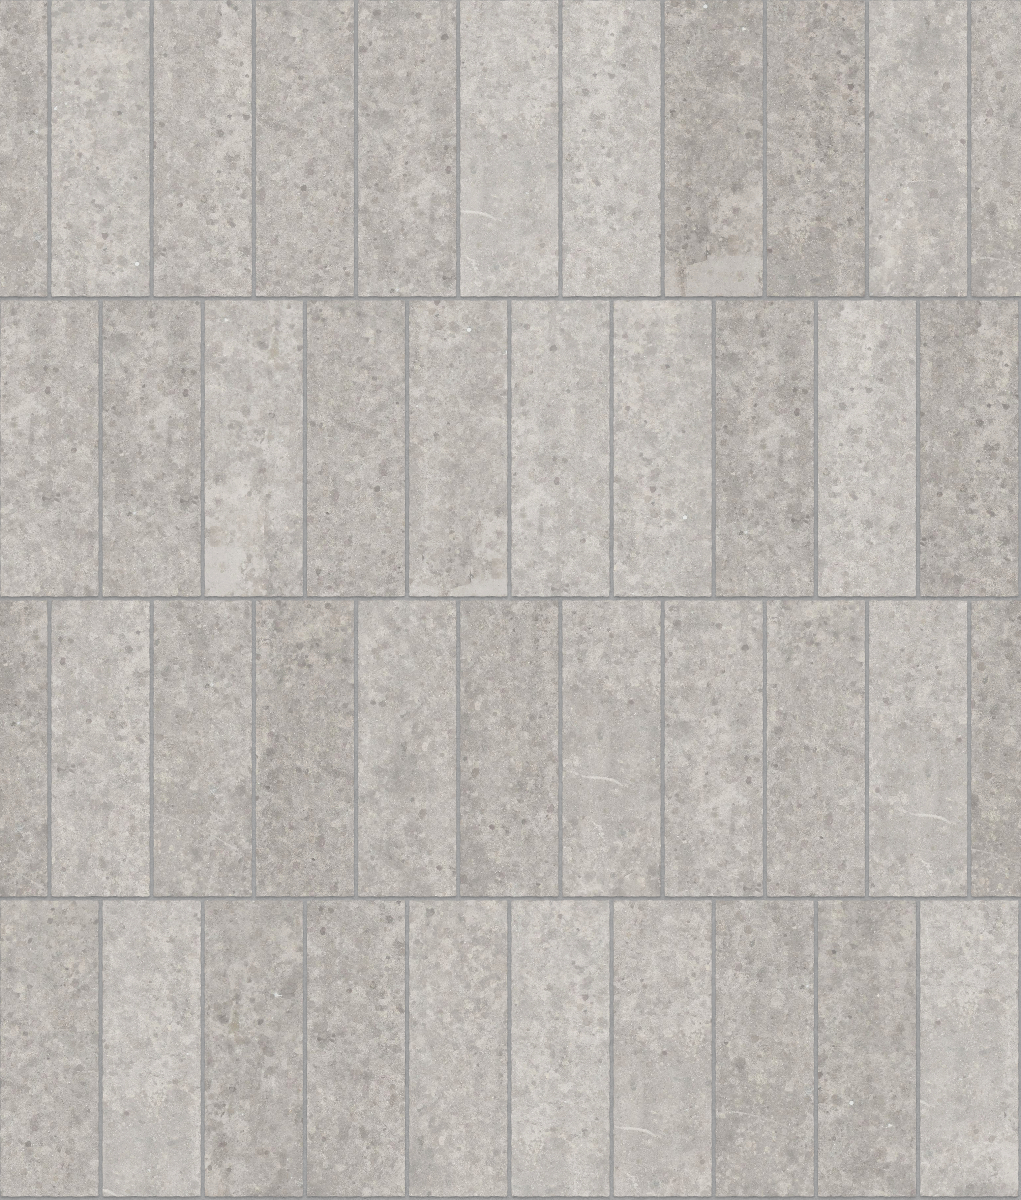 A seamless concrete texture with concrete blocks arranged in a Stretcher pattern